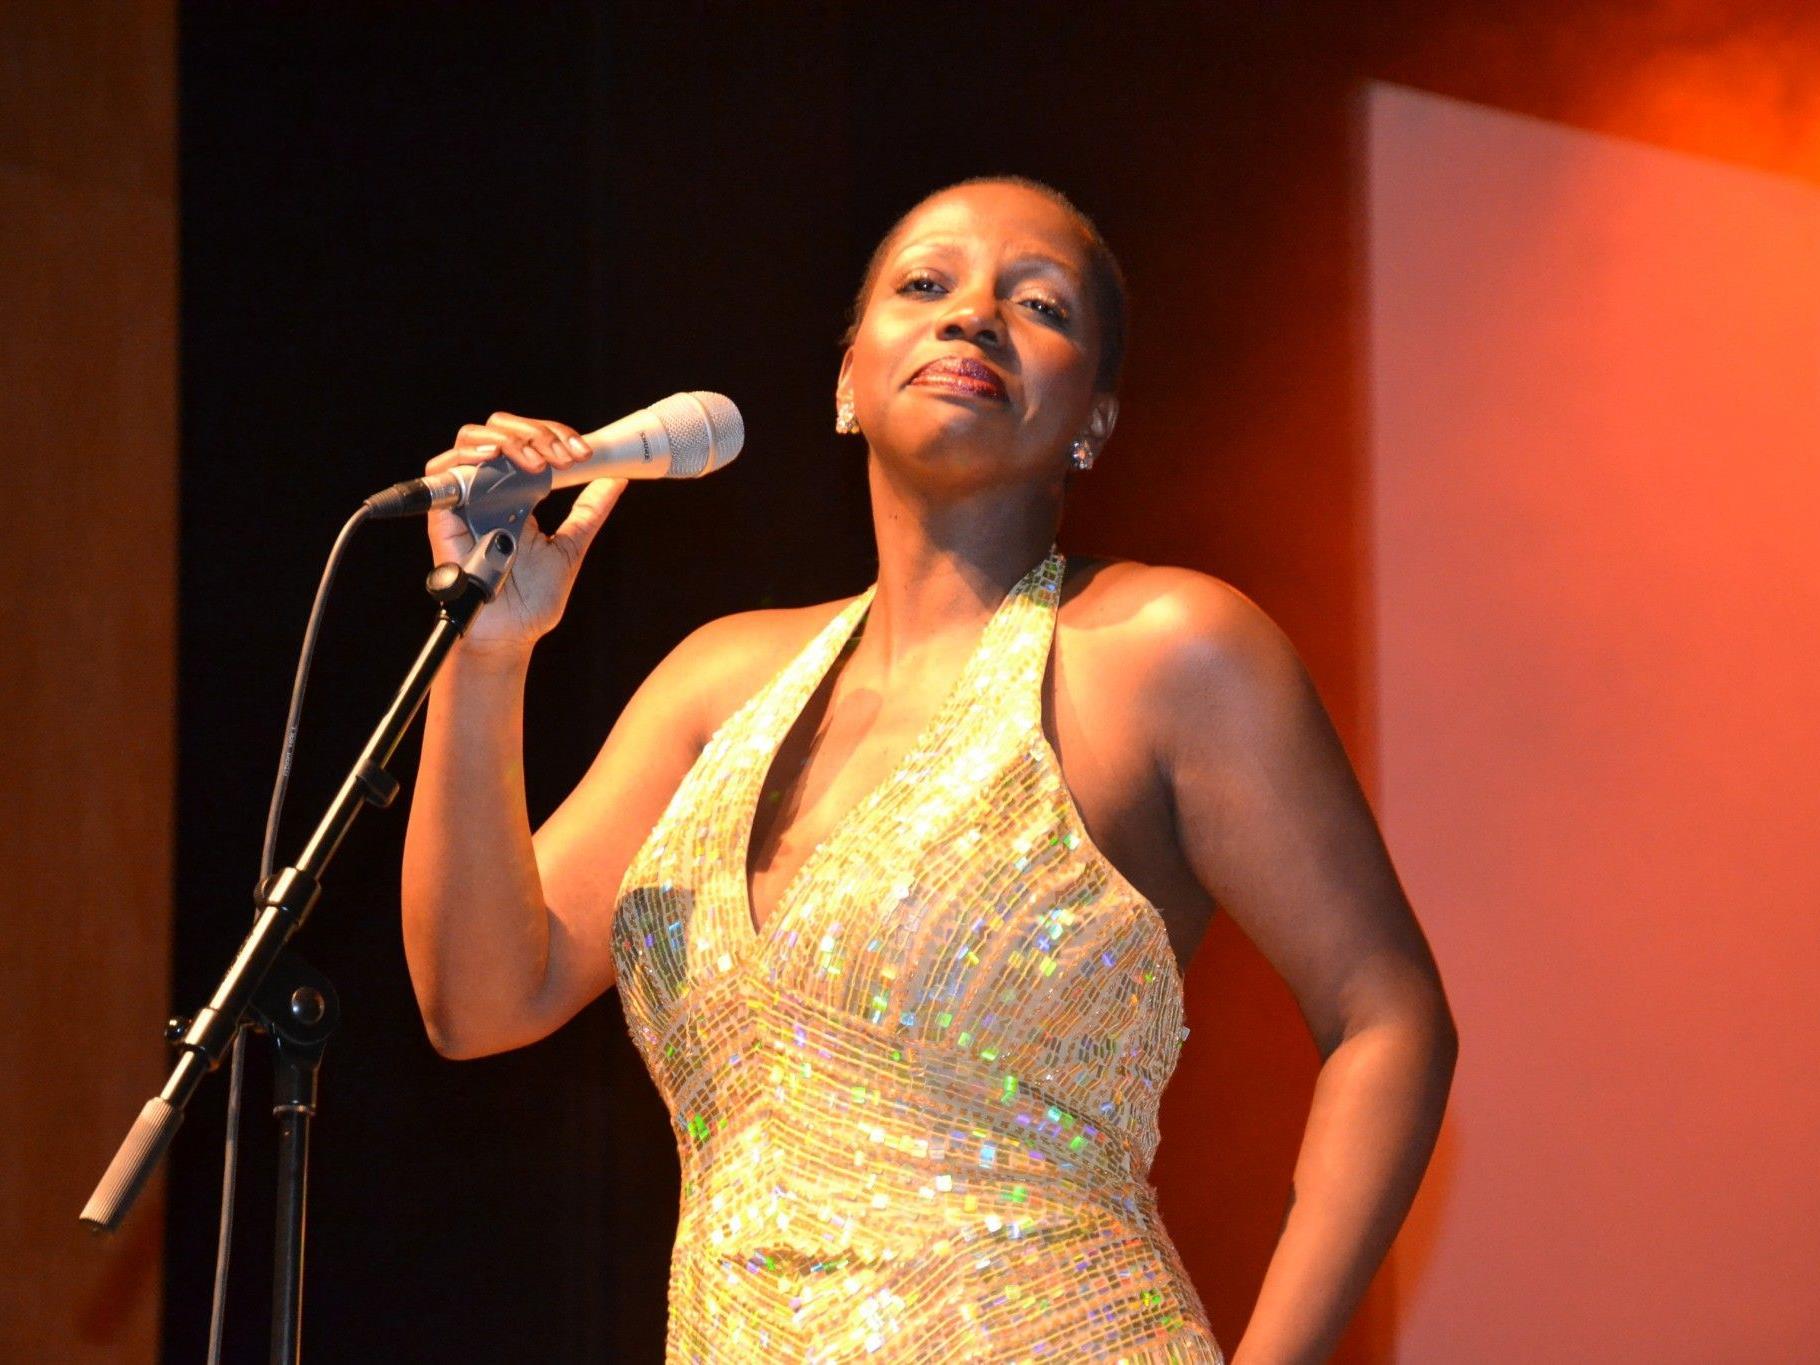 Rachelle Jeanty singing on stage